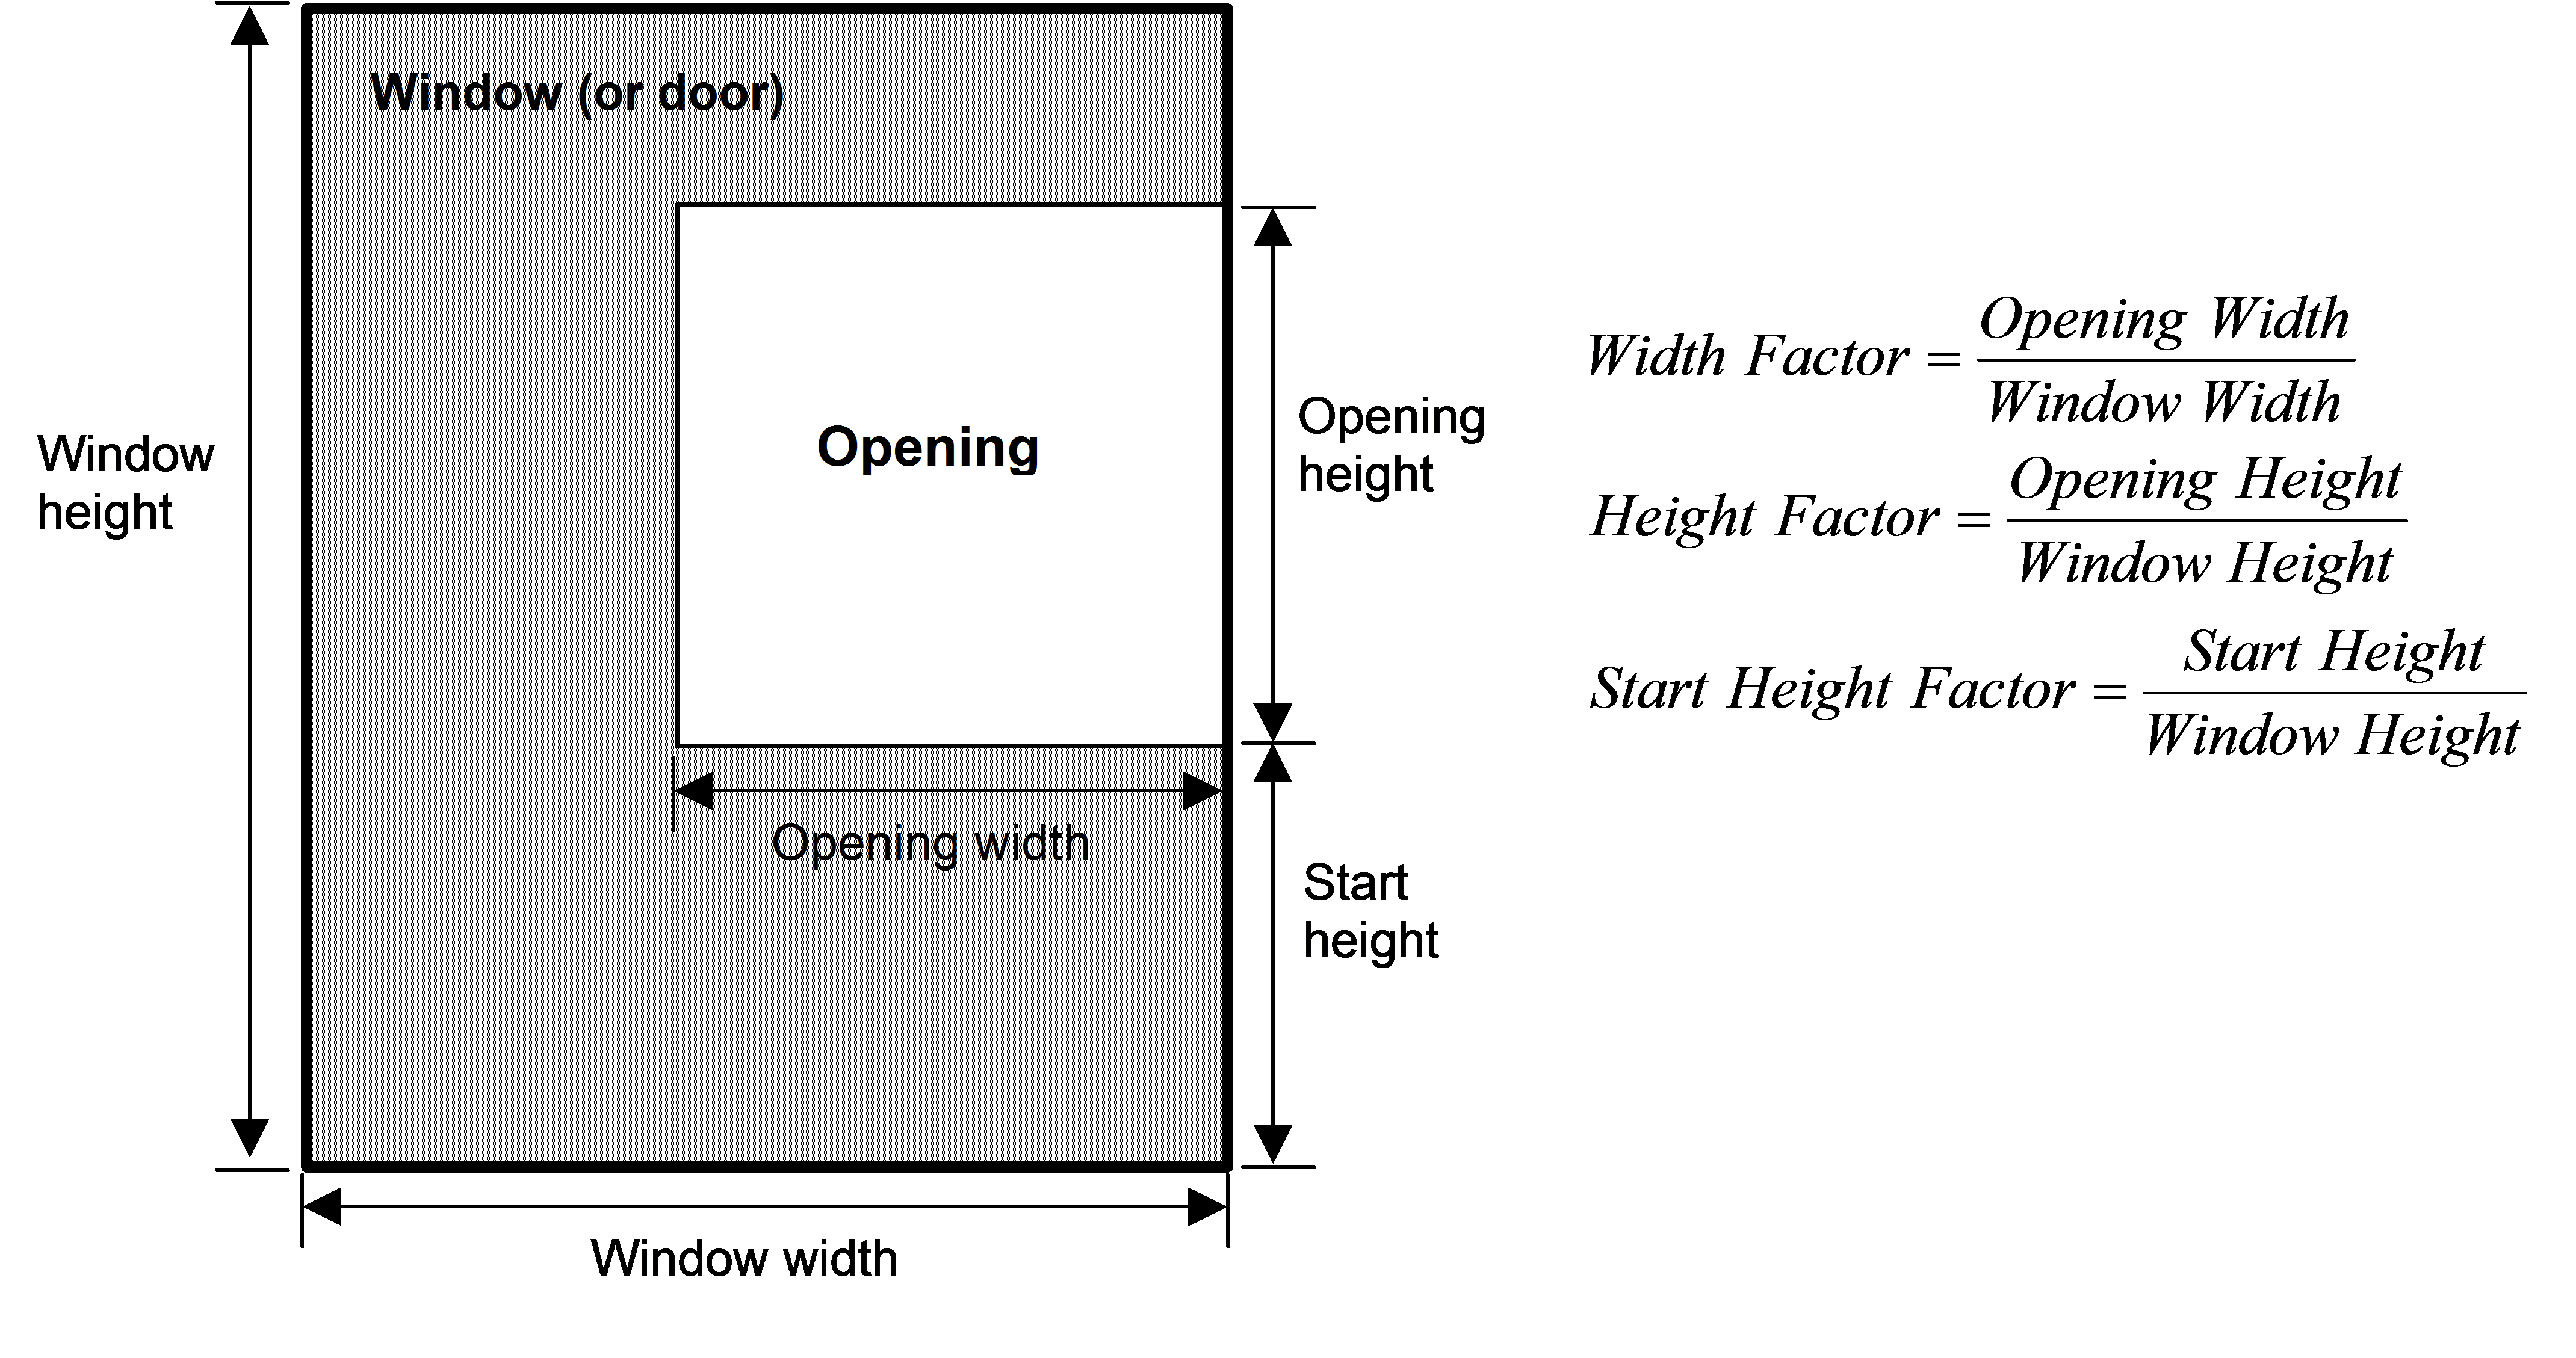 Window (or door) showing geometrical factors associated with an opening through which air flows.